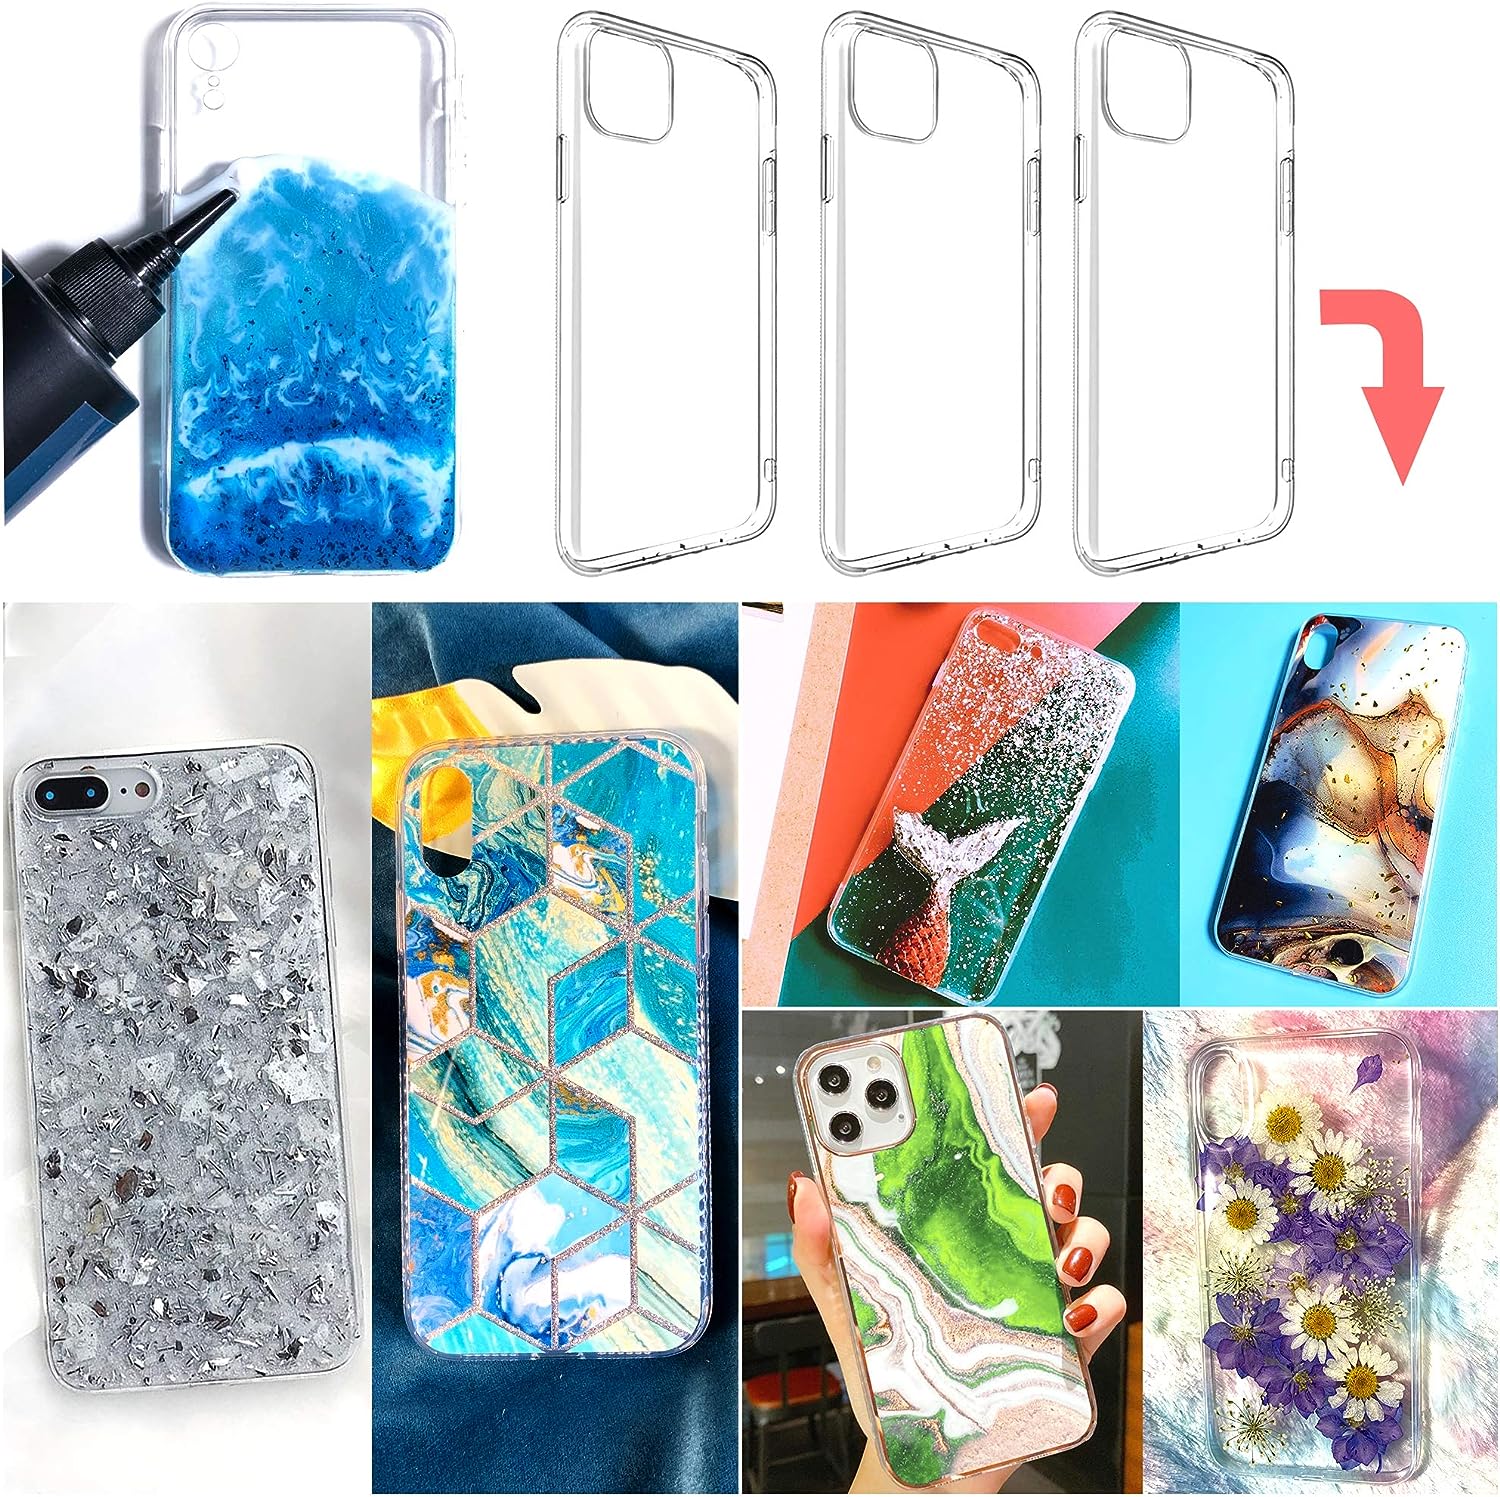 Decoden Whipped Cream Phone Case DIY Epoxy Resin Casting Kits Pack of 36